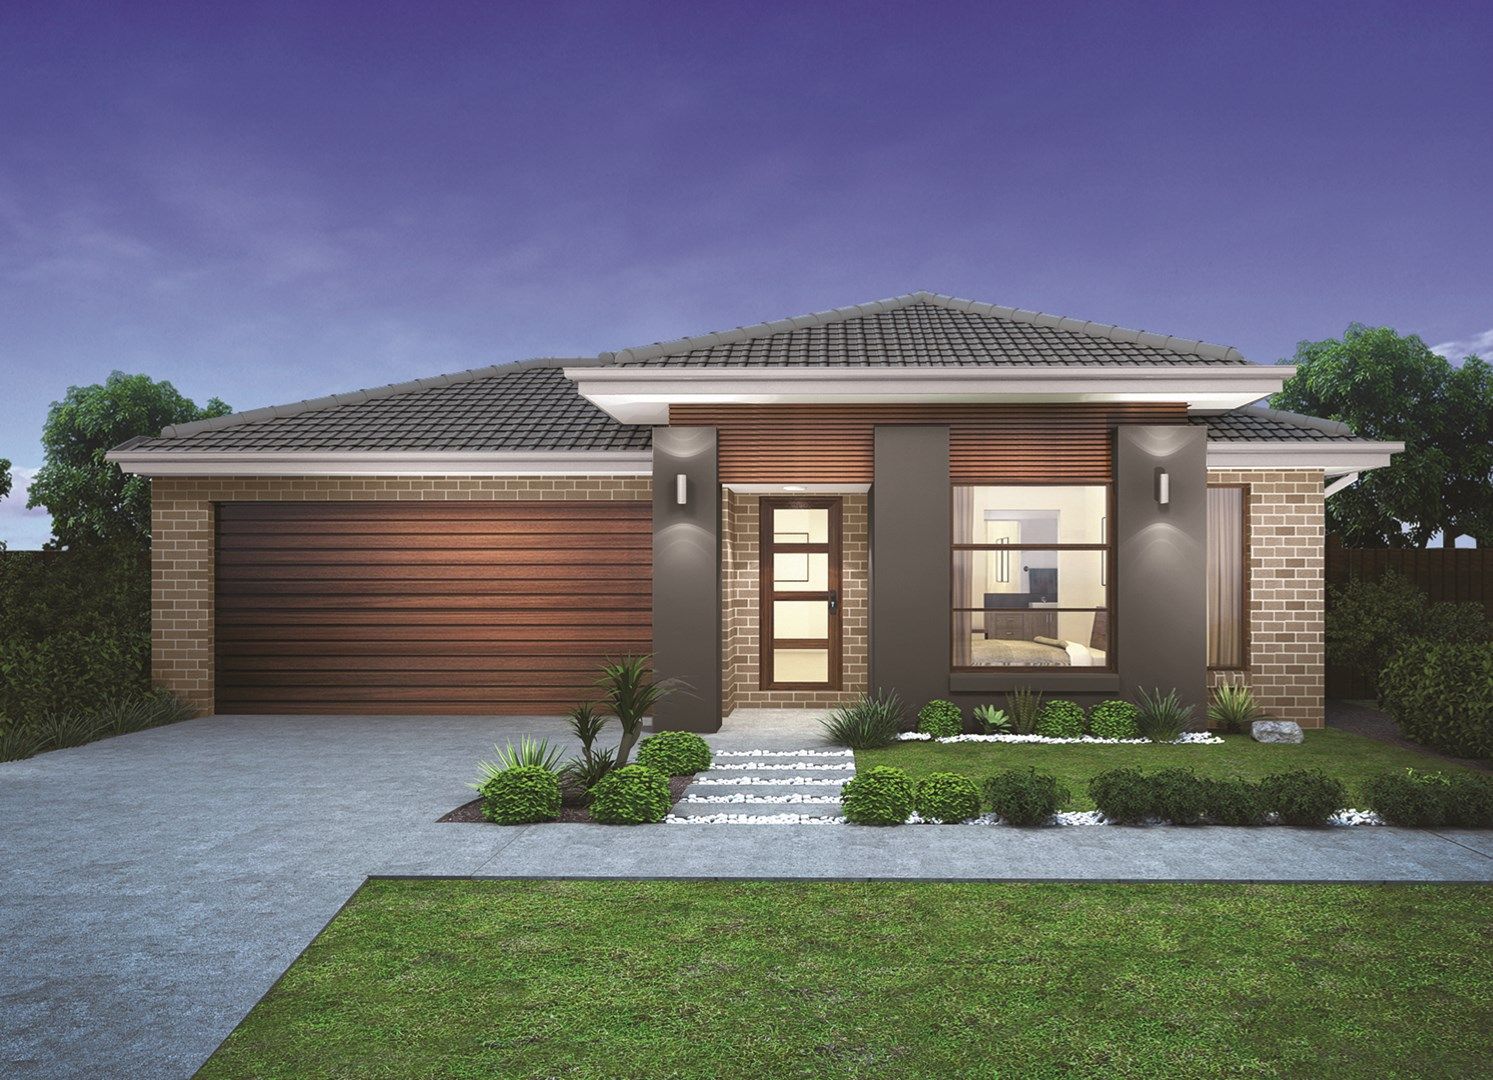 4 bedrooms New House & Land in LOT 1502 Monument Estate PLUMPTON VIC, 3335